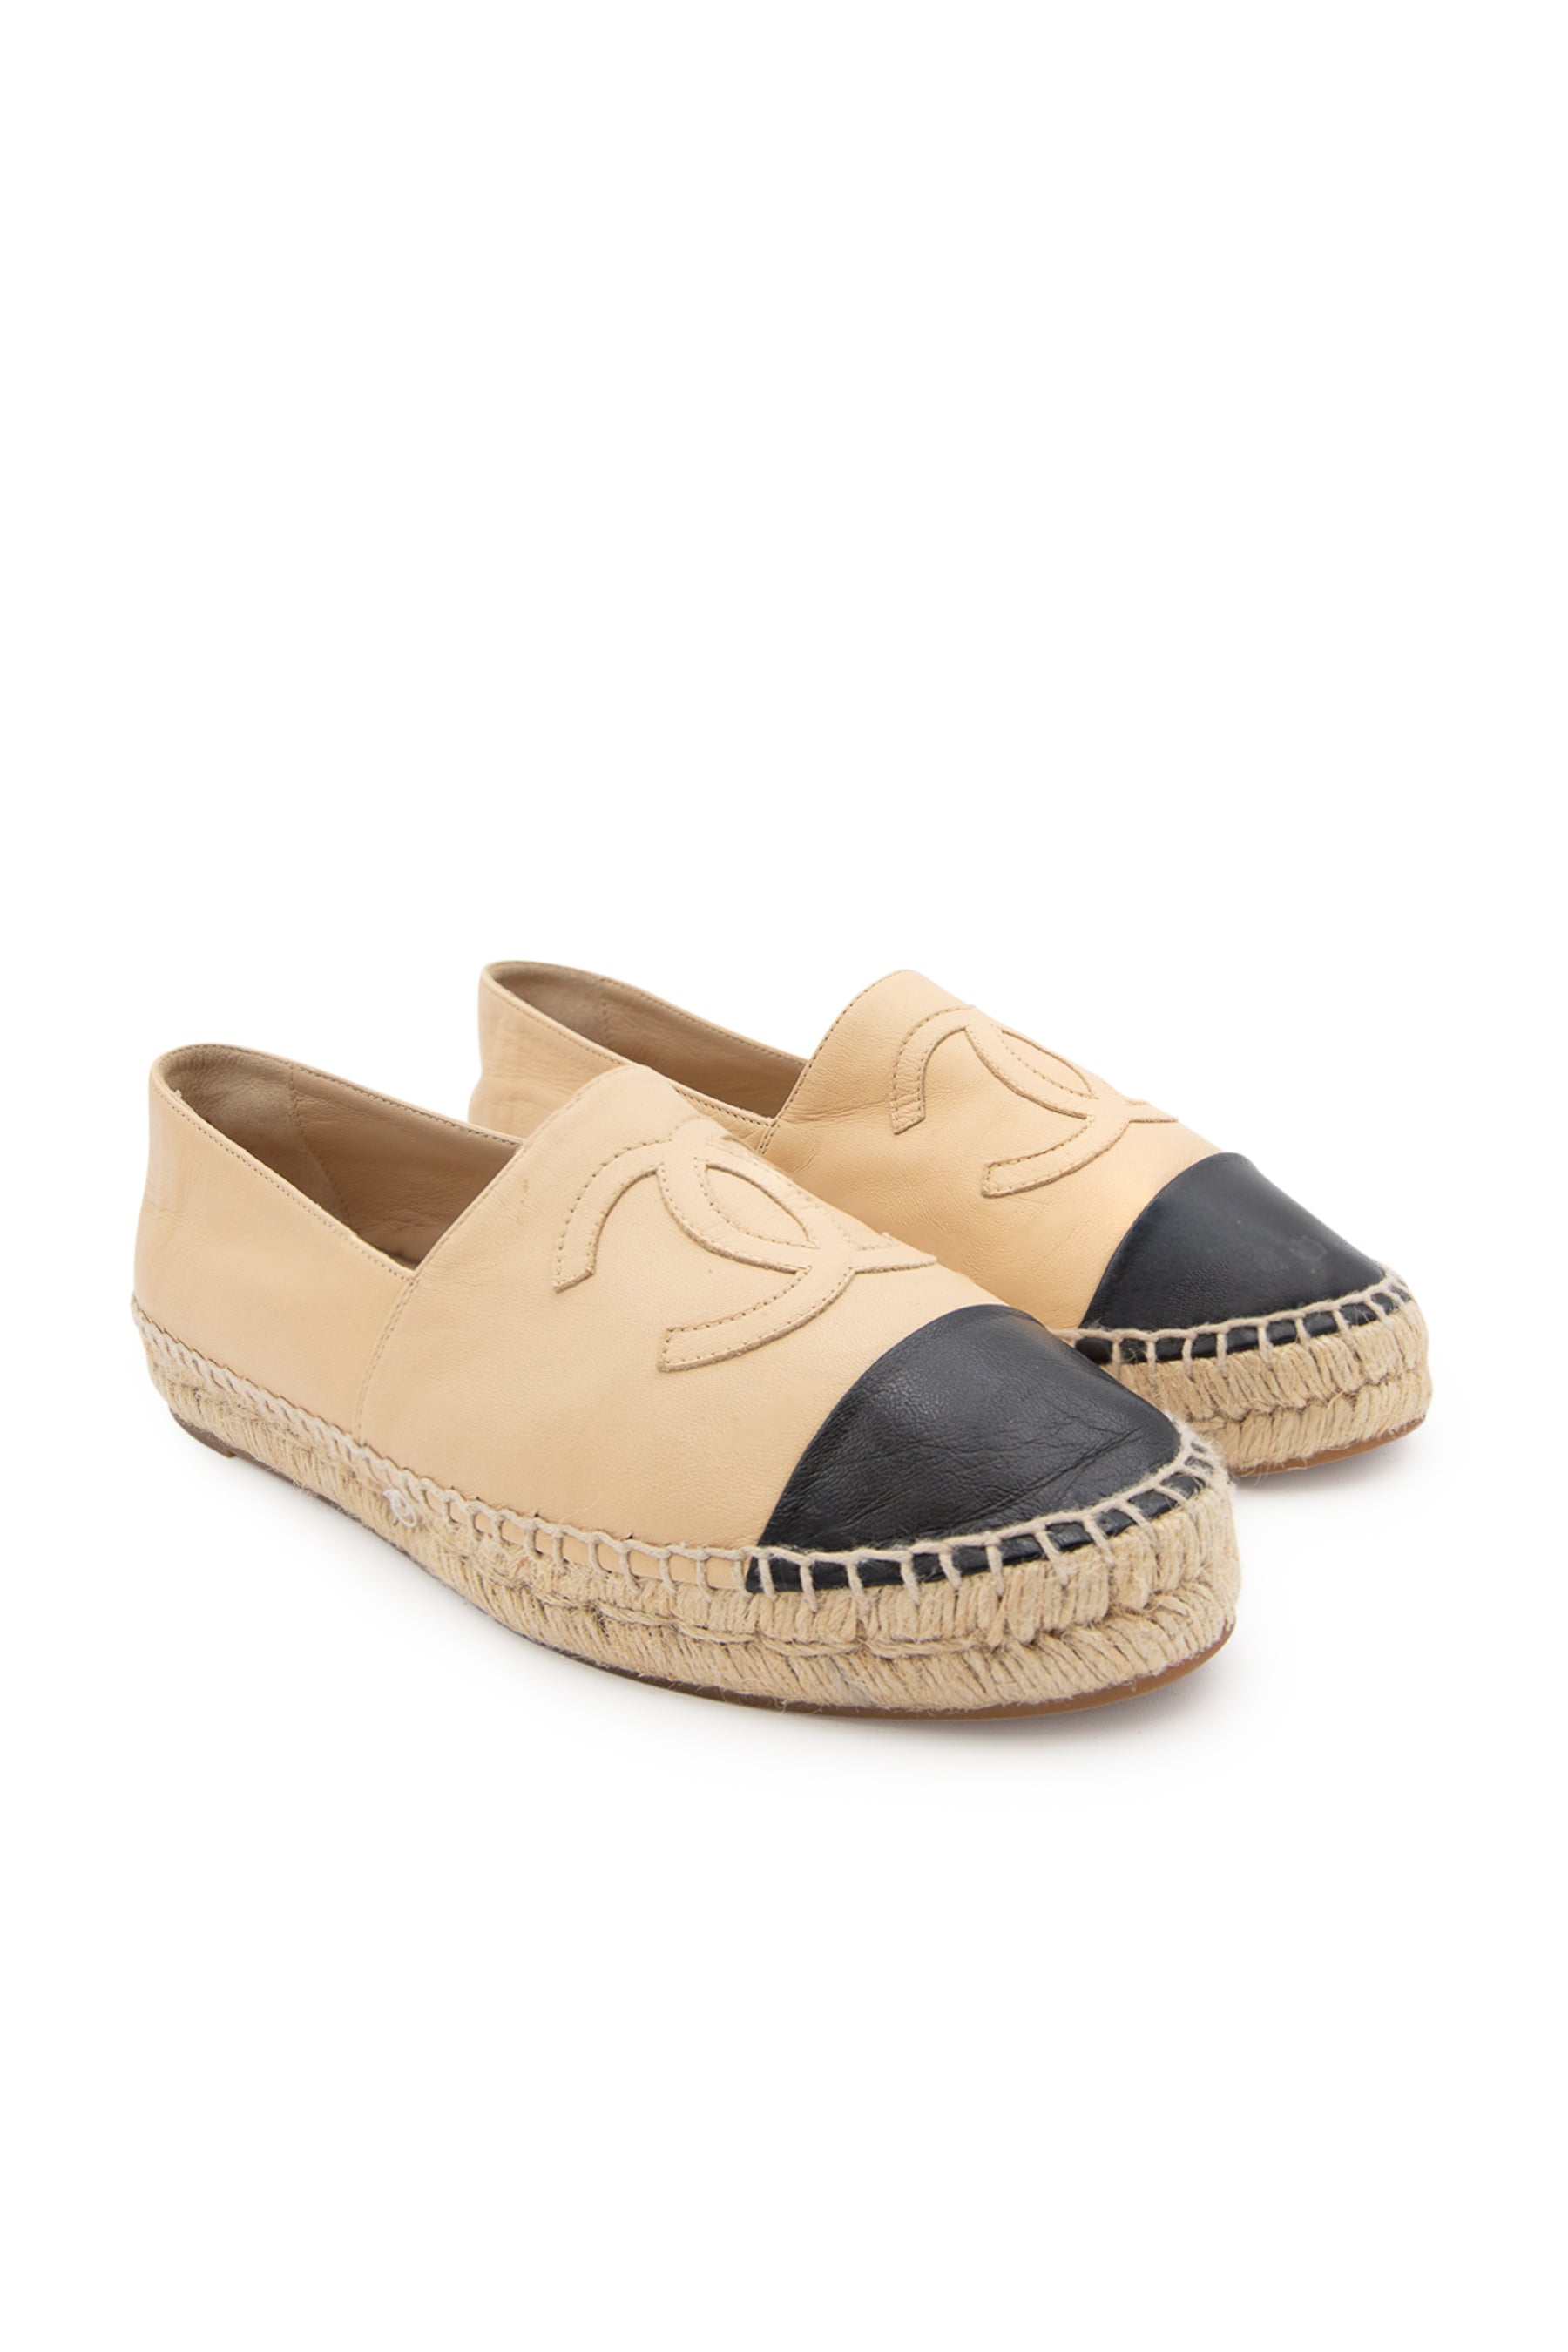 Pre-owned Chanel Cloth Espadrilles In Other